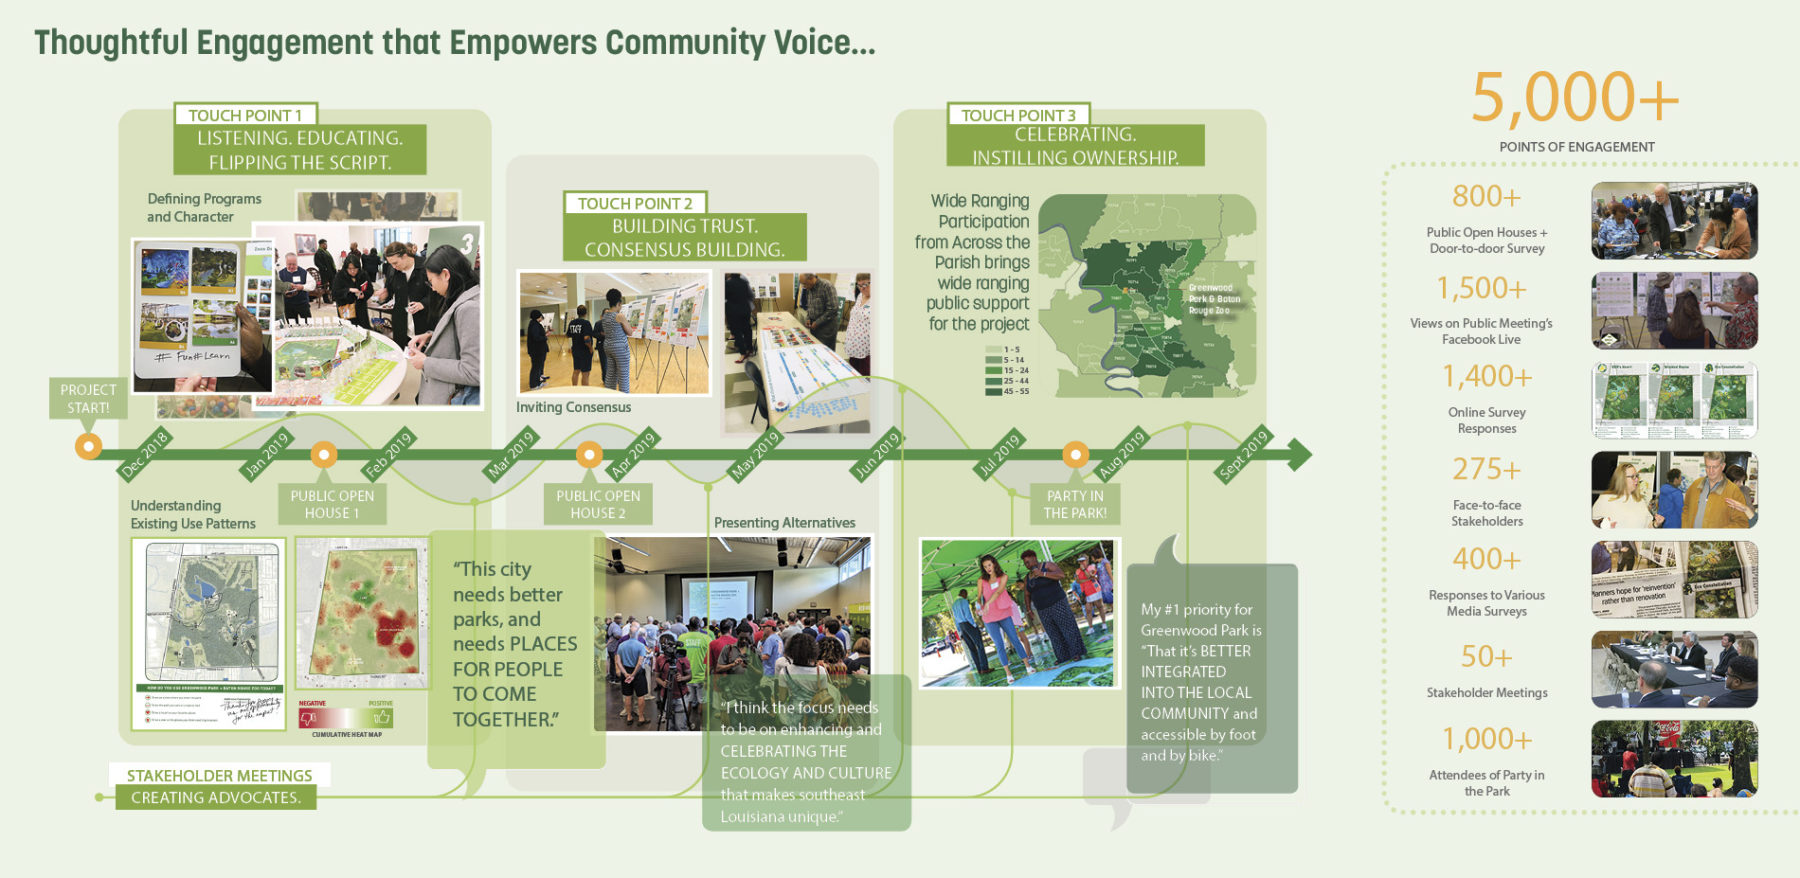 composite image with a timeline for the project's community engagement and stats on the number of points of engagement. image title reads 